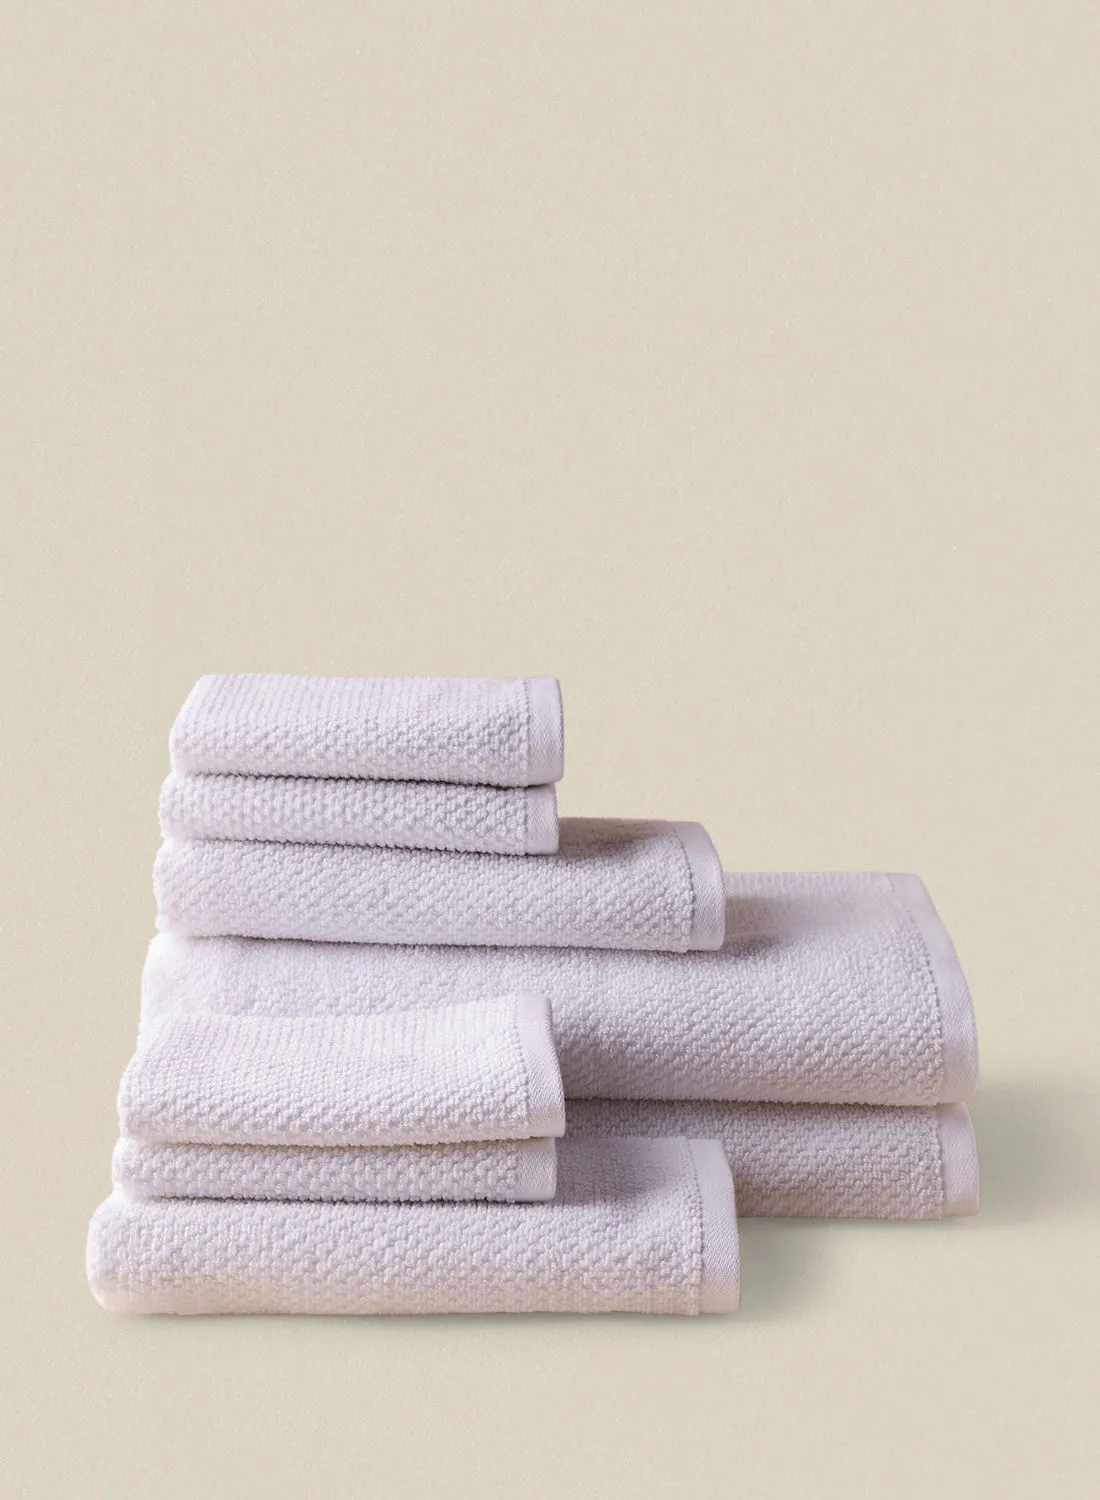 noon east 8 Piece Bathroom Towel Set - 500 GSM 100% Organic Cotton - 2 Hand Towel - 4 Face Towel - 2 Bath Towel - White Color - Highly Absorbent - Fast Dry